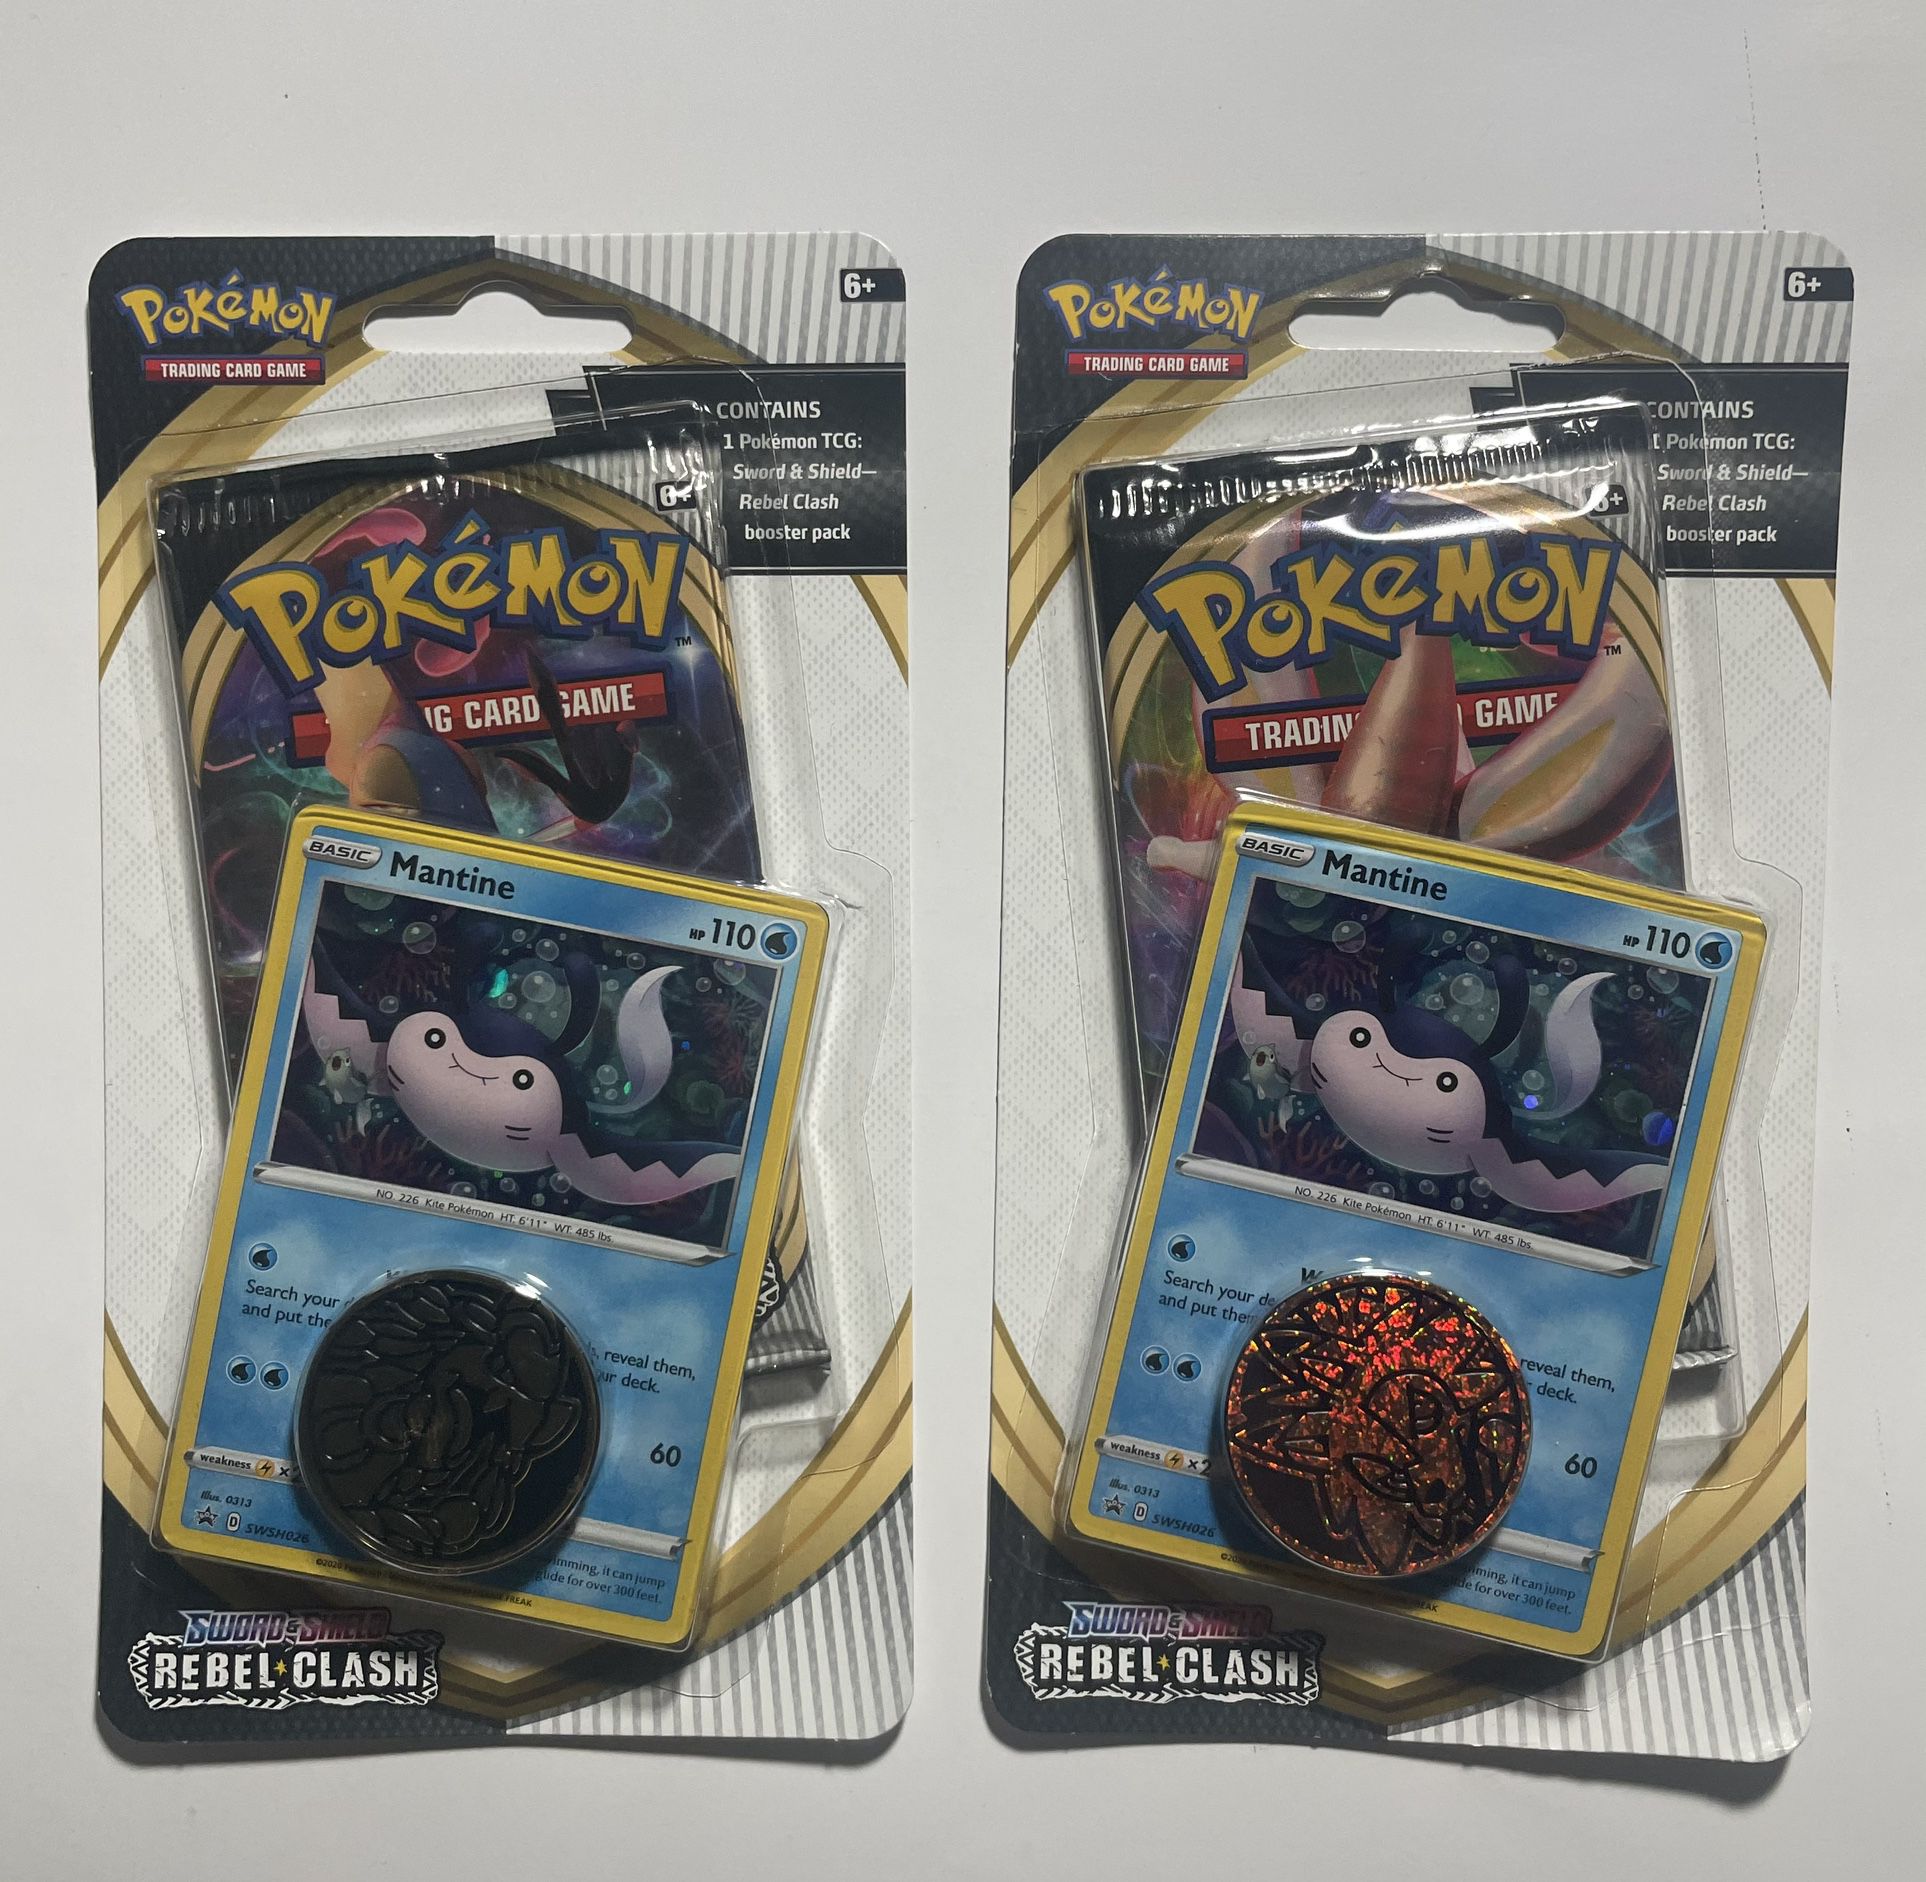 Lot of 2 sealed Pokemon TCG Sword and Shield Rebel Clash blister packs - each containing 1 10 card Sword and Shield and Rebel Clash booster pack, 1 ho